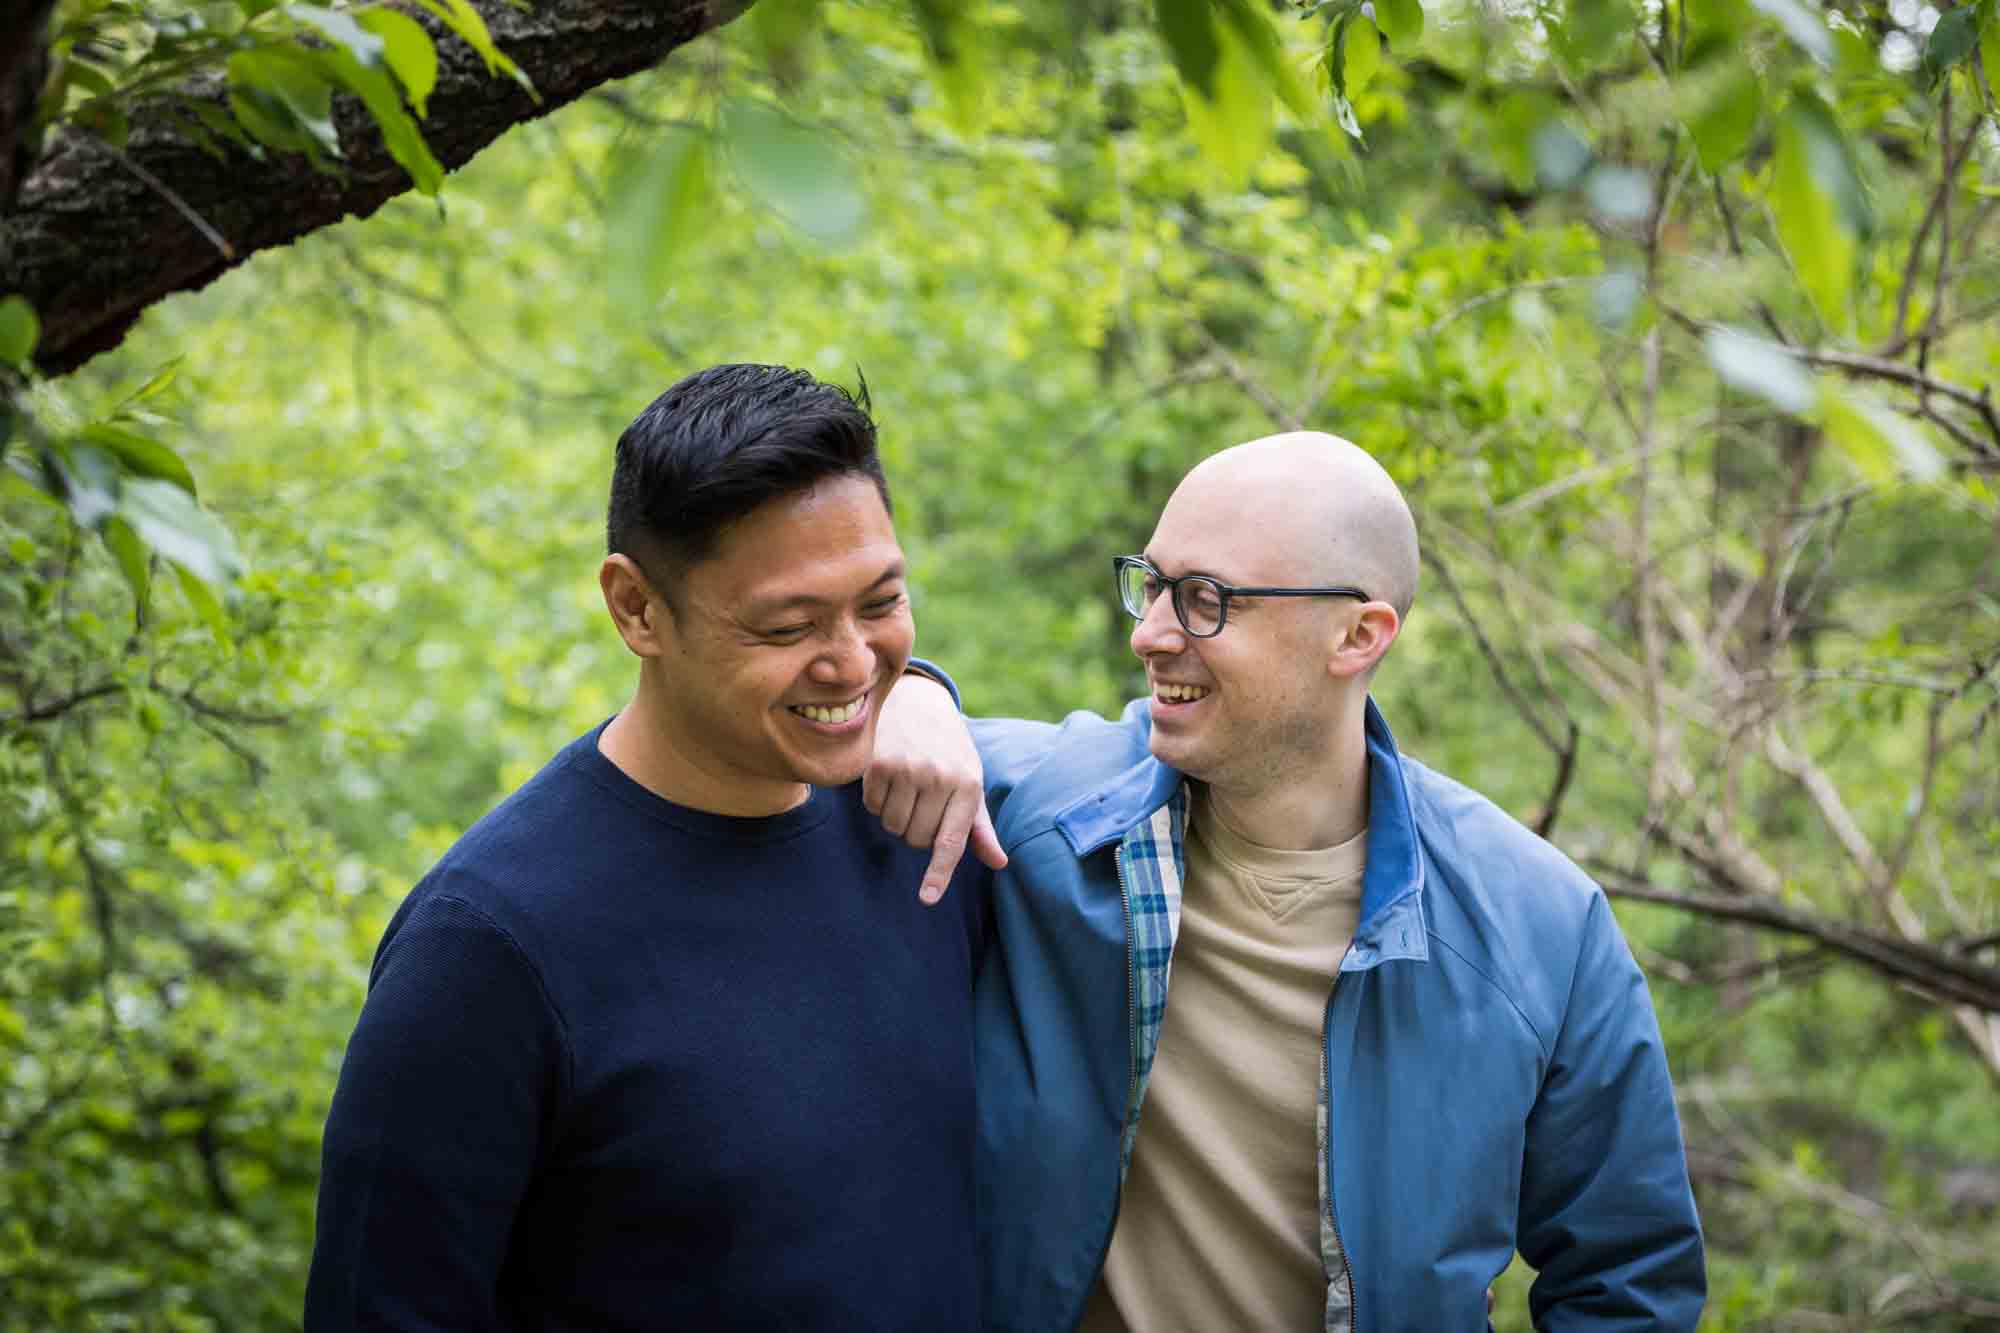 Two men wearing blue and laughing from a Central Park engagement photo shoot